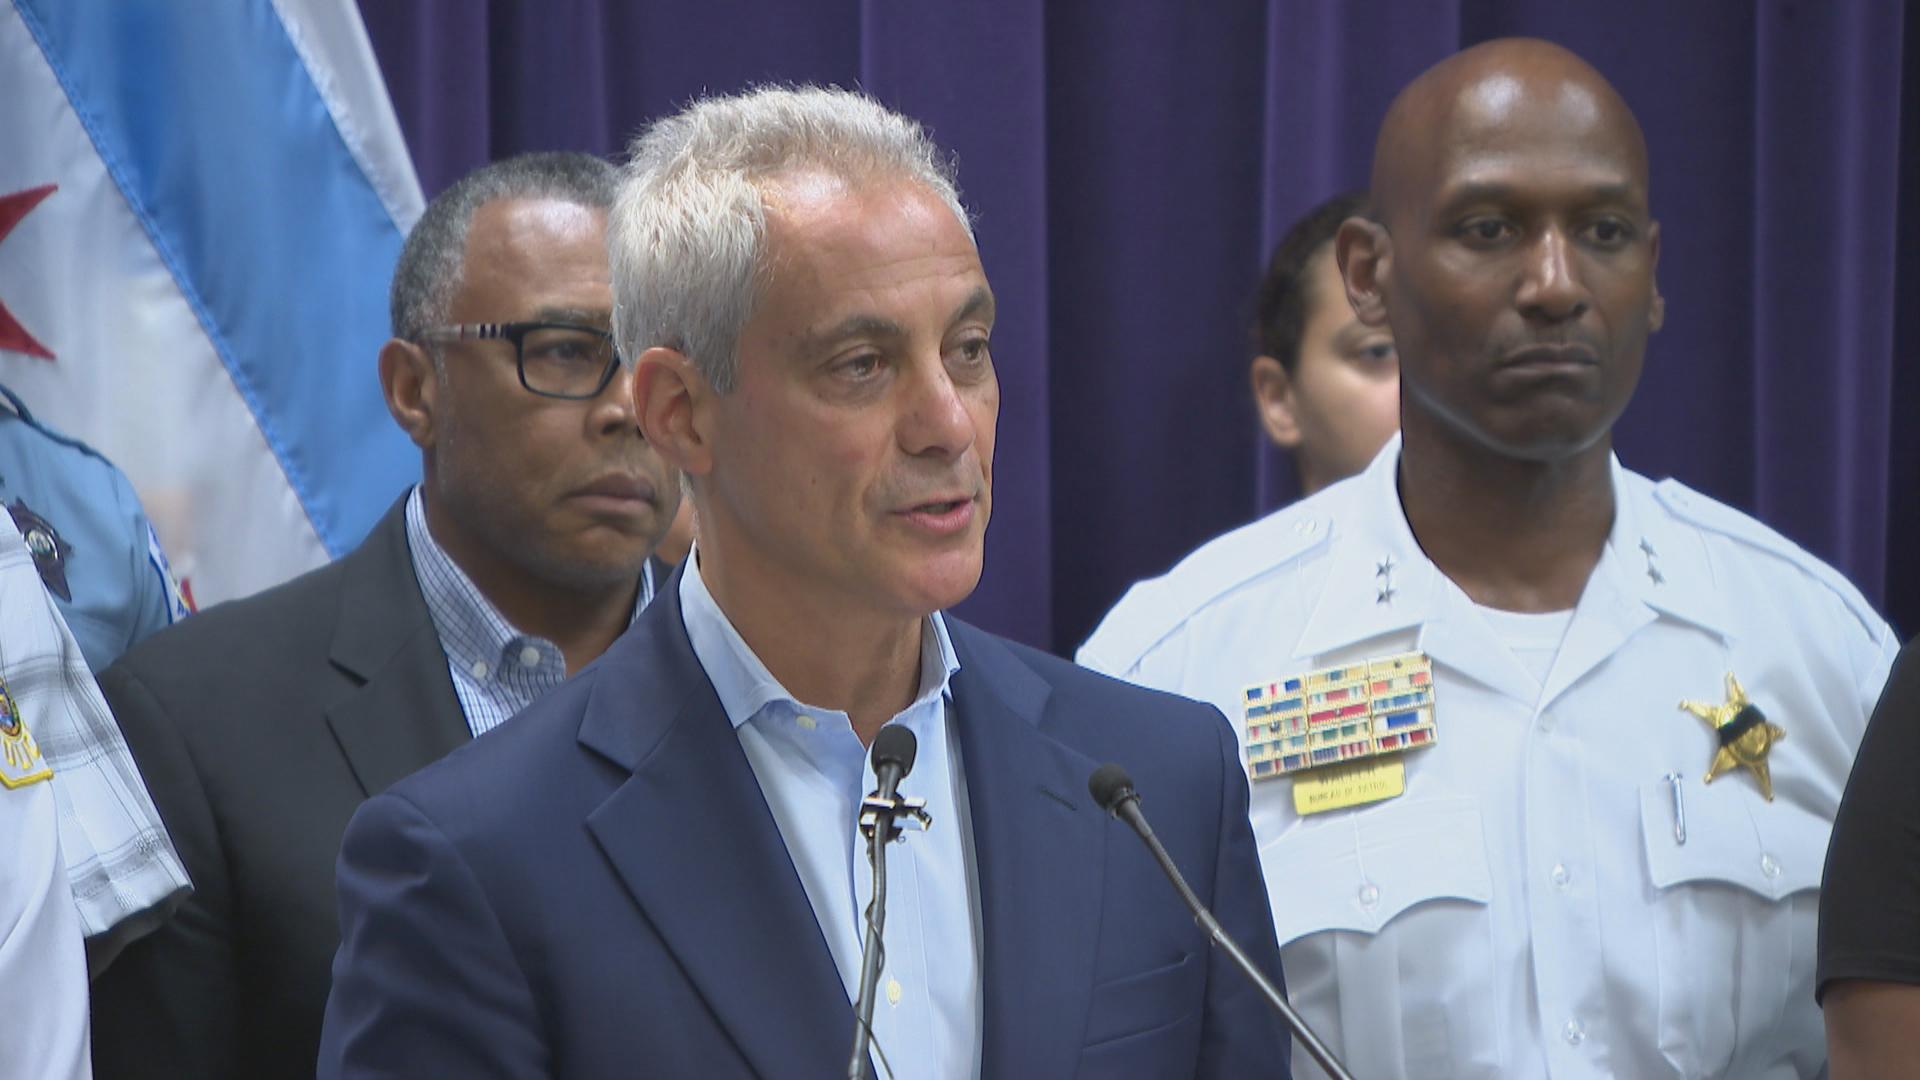 Mayor Rahm Emanuel addresses safety in Chicago on Aug. 8, 2018 following a deadly weekend of violence. (Chicago Tonight)